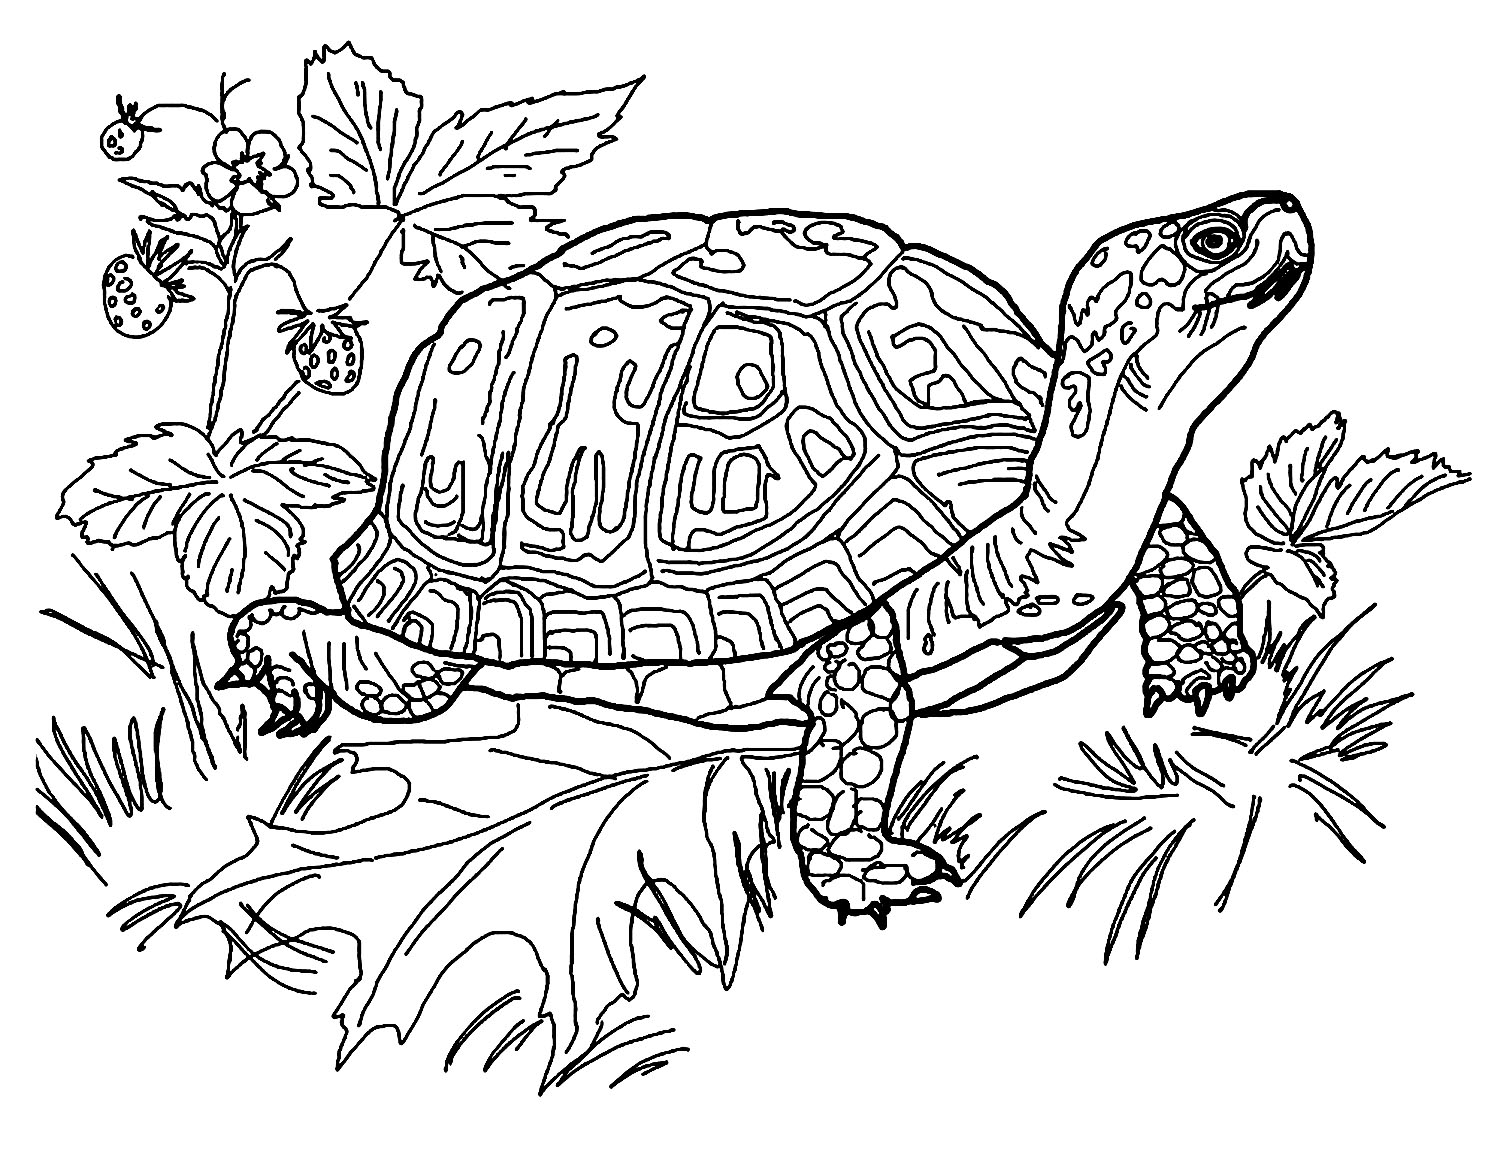 Turtles to download - Turtles Kids Coloring Pages